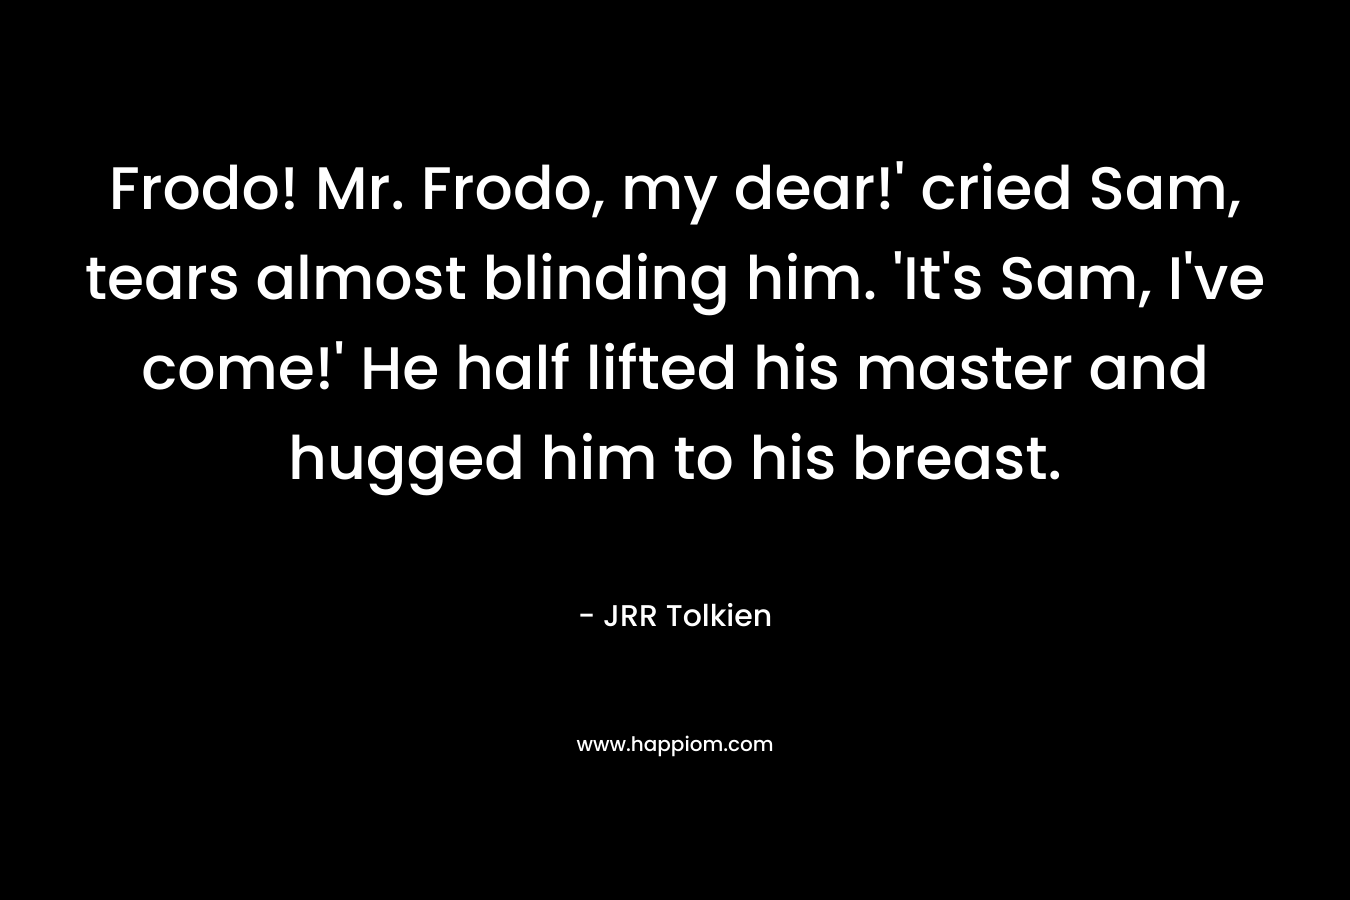 Frodo! Mr. Frodo, my dear!' cried Sam, tears almost blinding him. 'It's Sam, I've come!' He half lifted his master and hugged him to his breast.